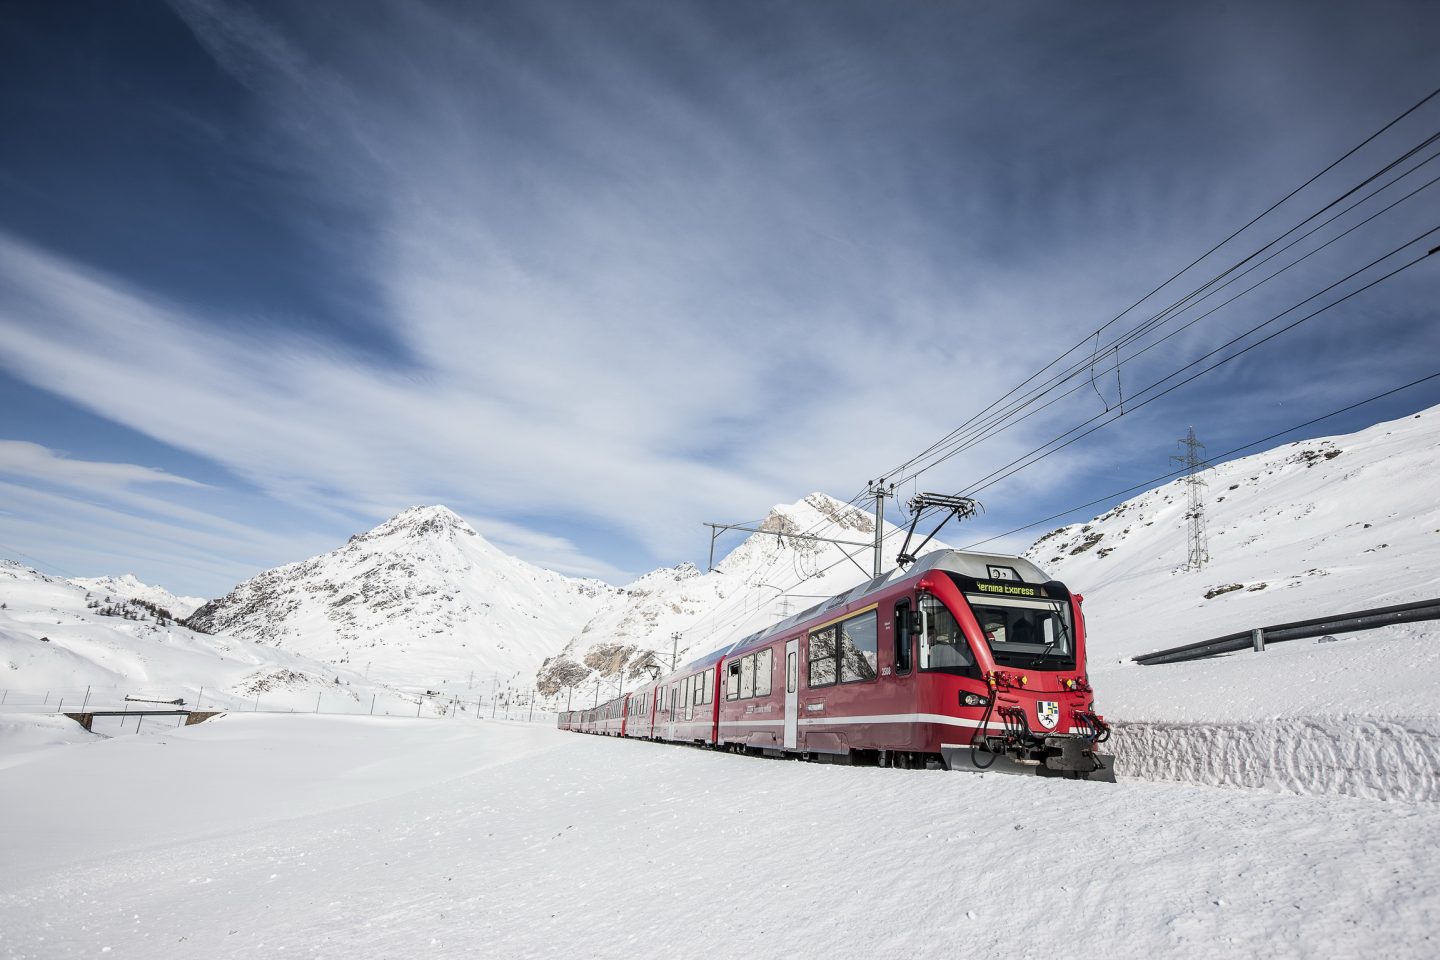 The famous red train on the snowy Bernina Pass.